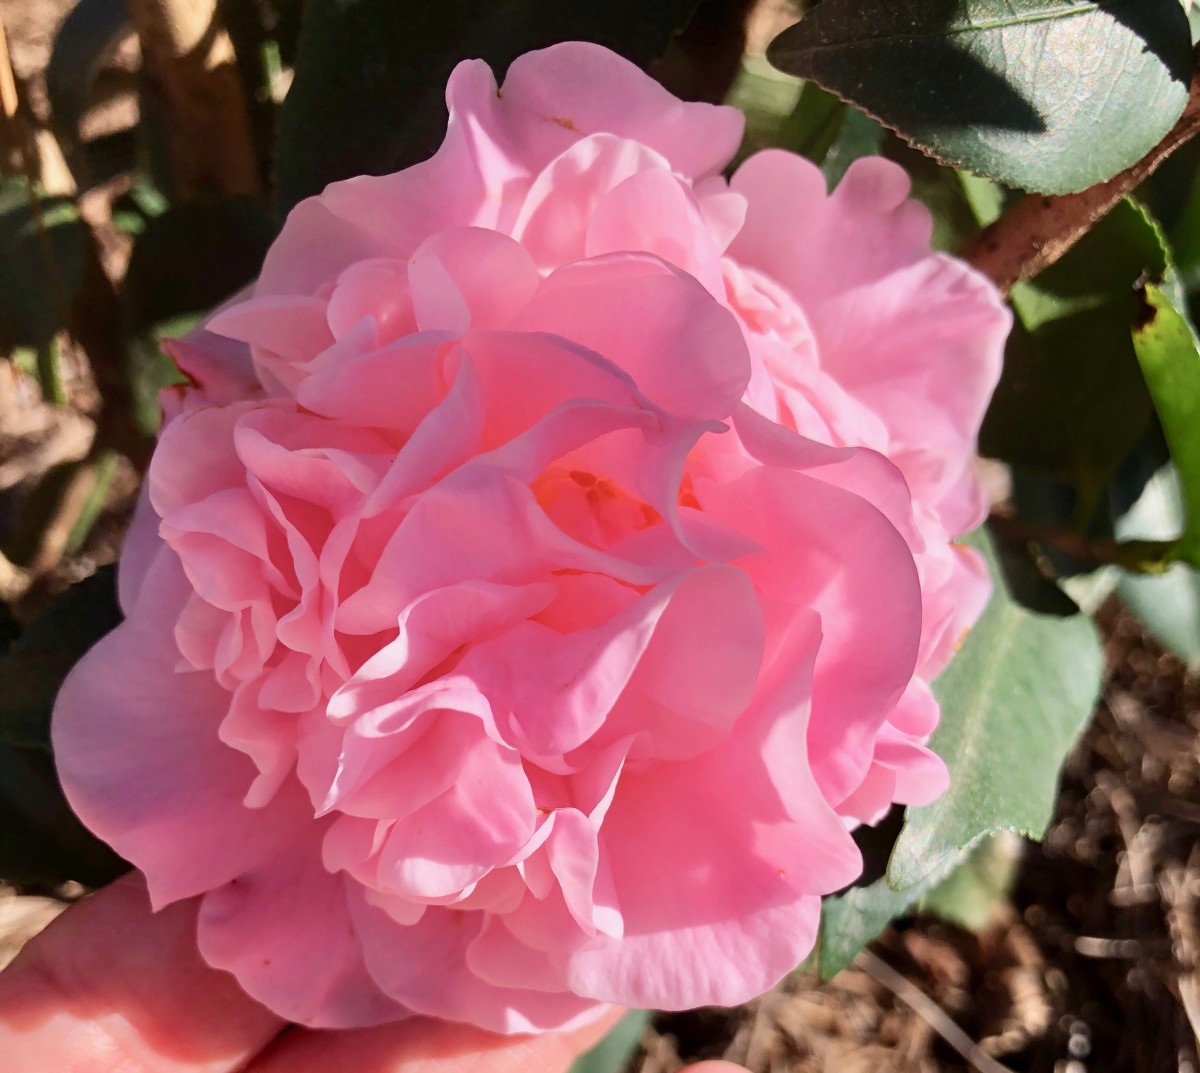 One of the most beautiful japonicas is “High Fragrance.” It is of a type that resembles a peony.